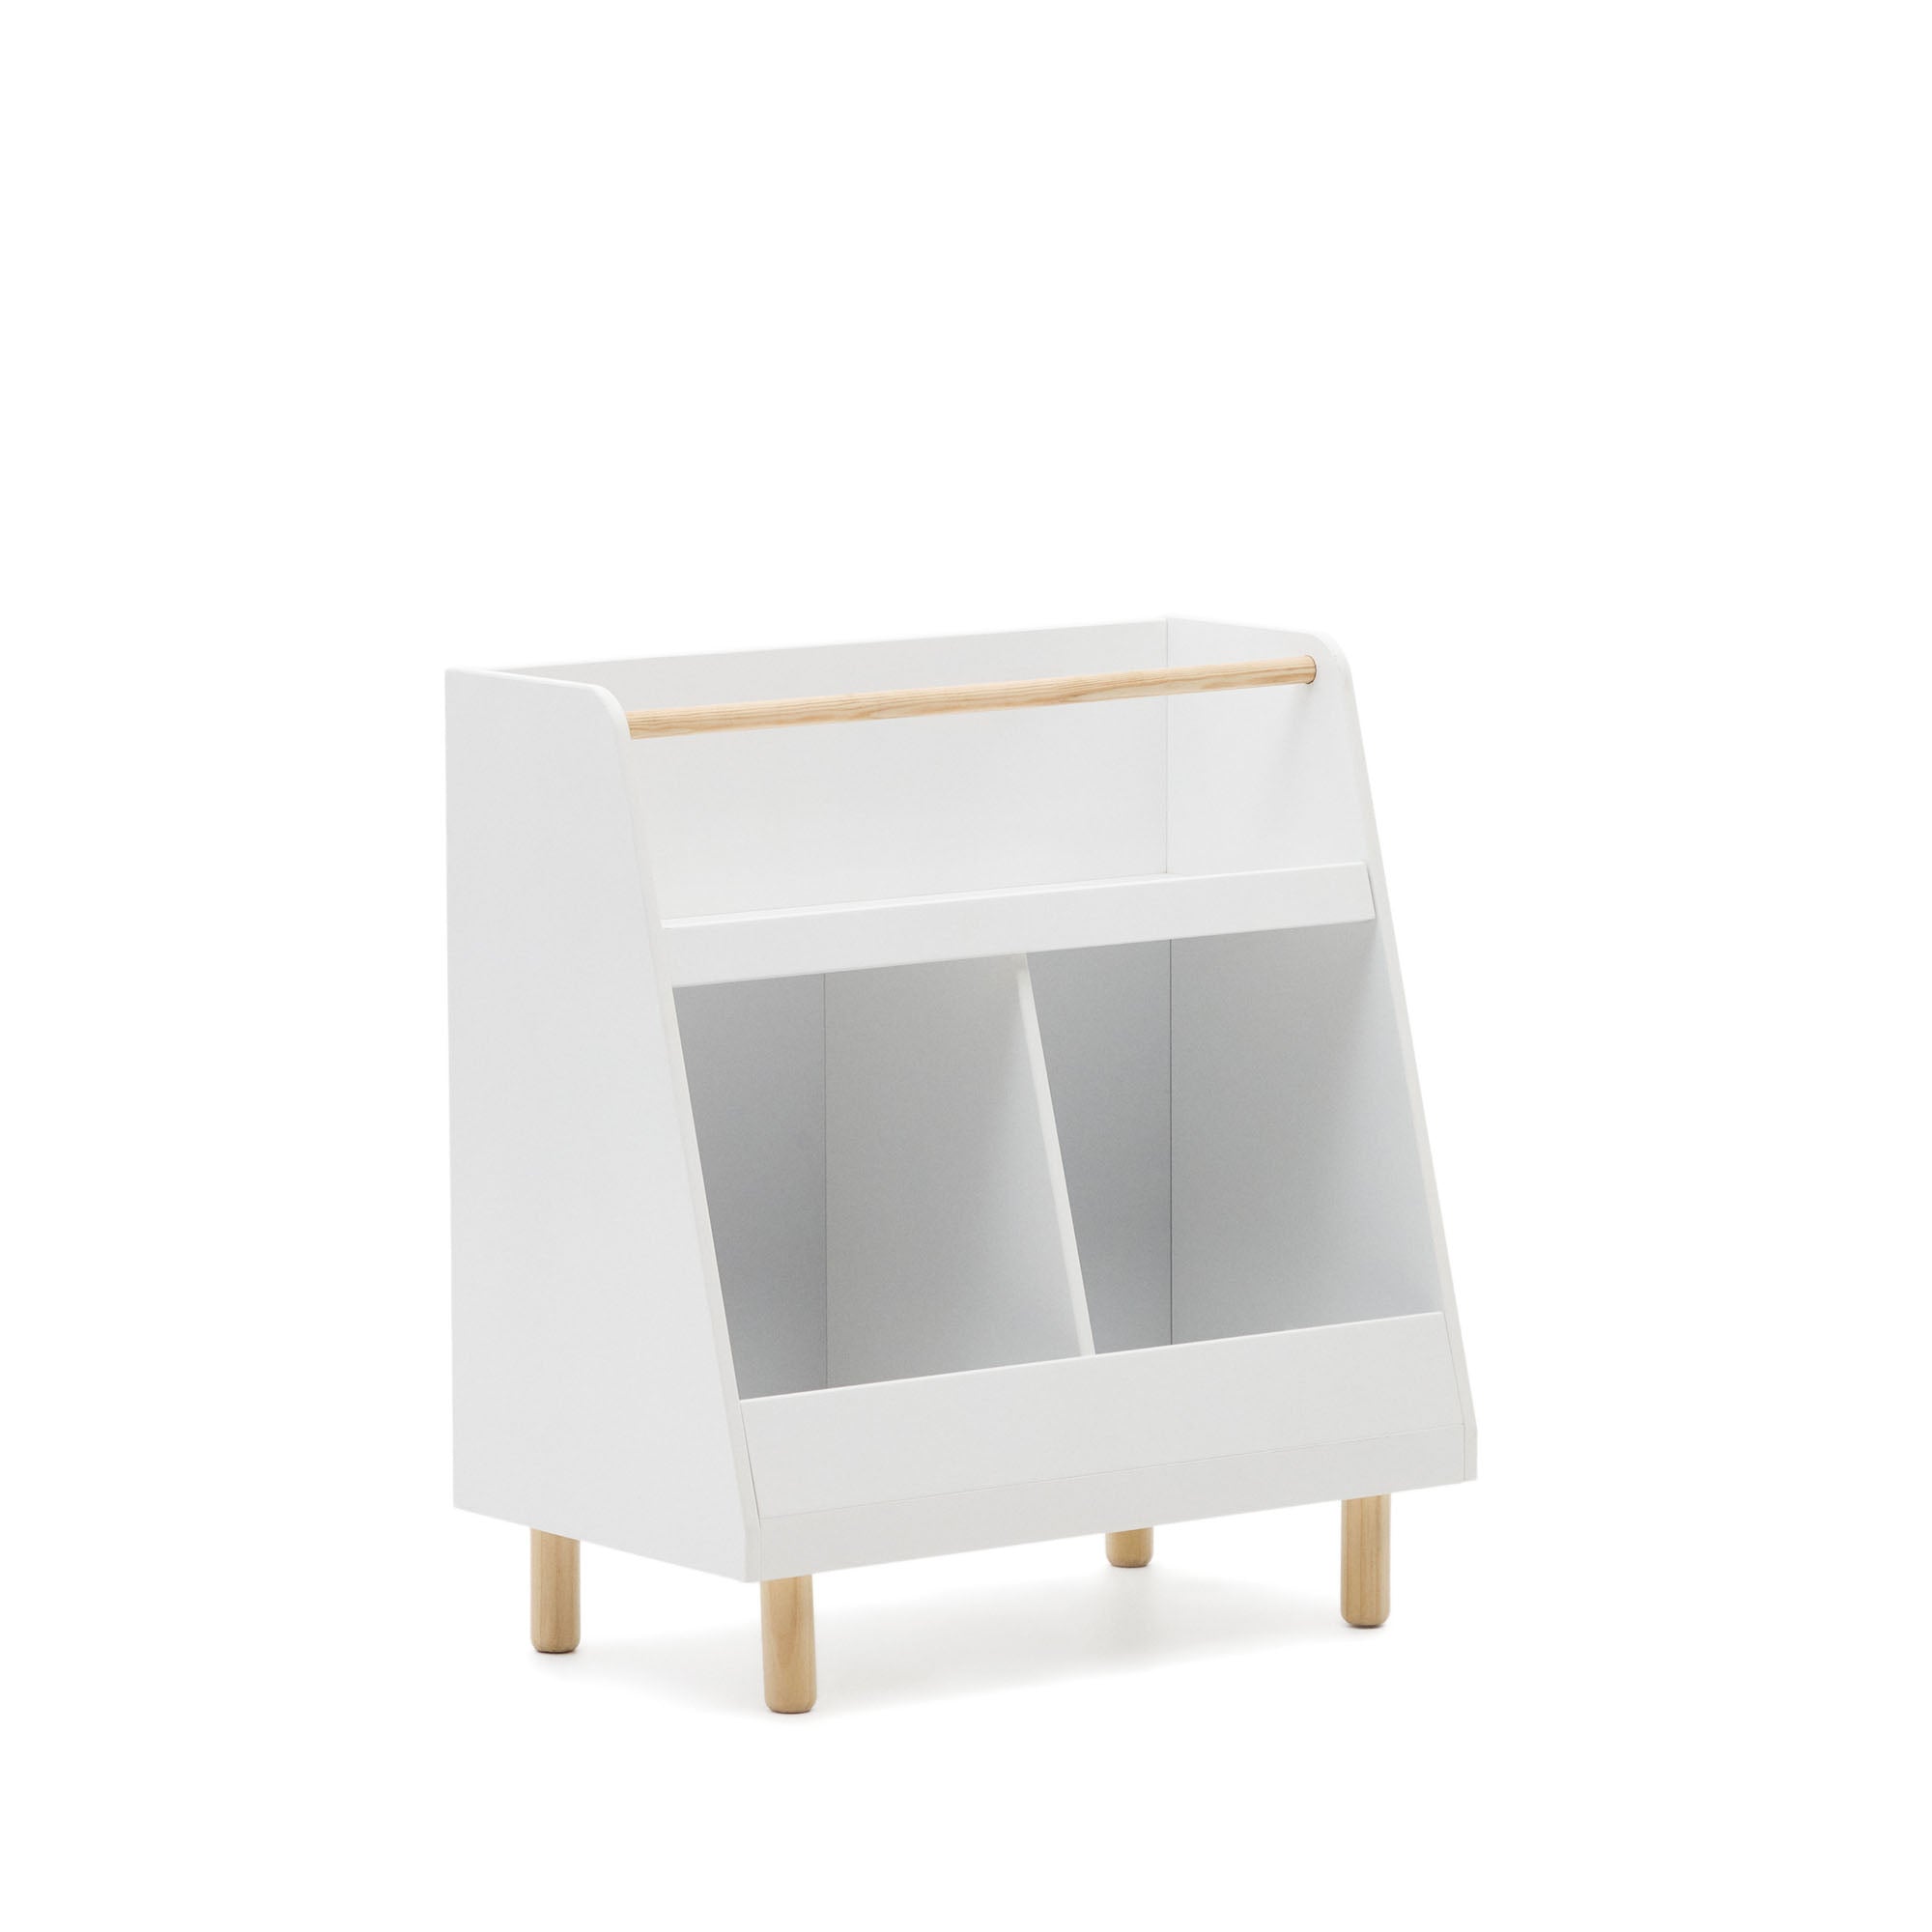 Serwa bookcase in white MDF with solid pine legs and bar FSC MIX Credit